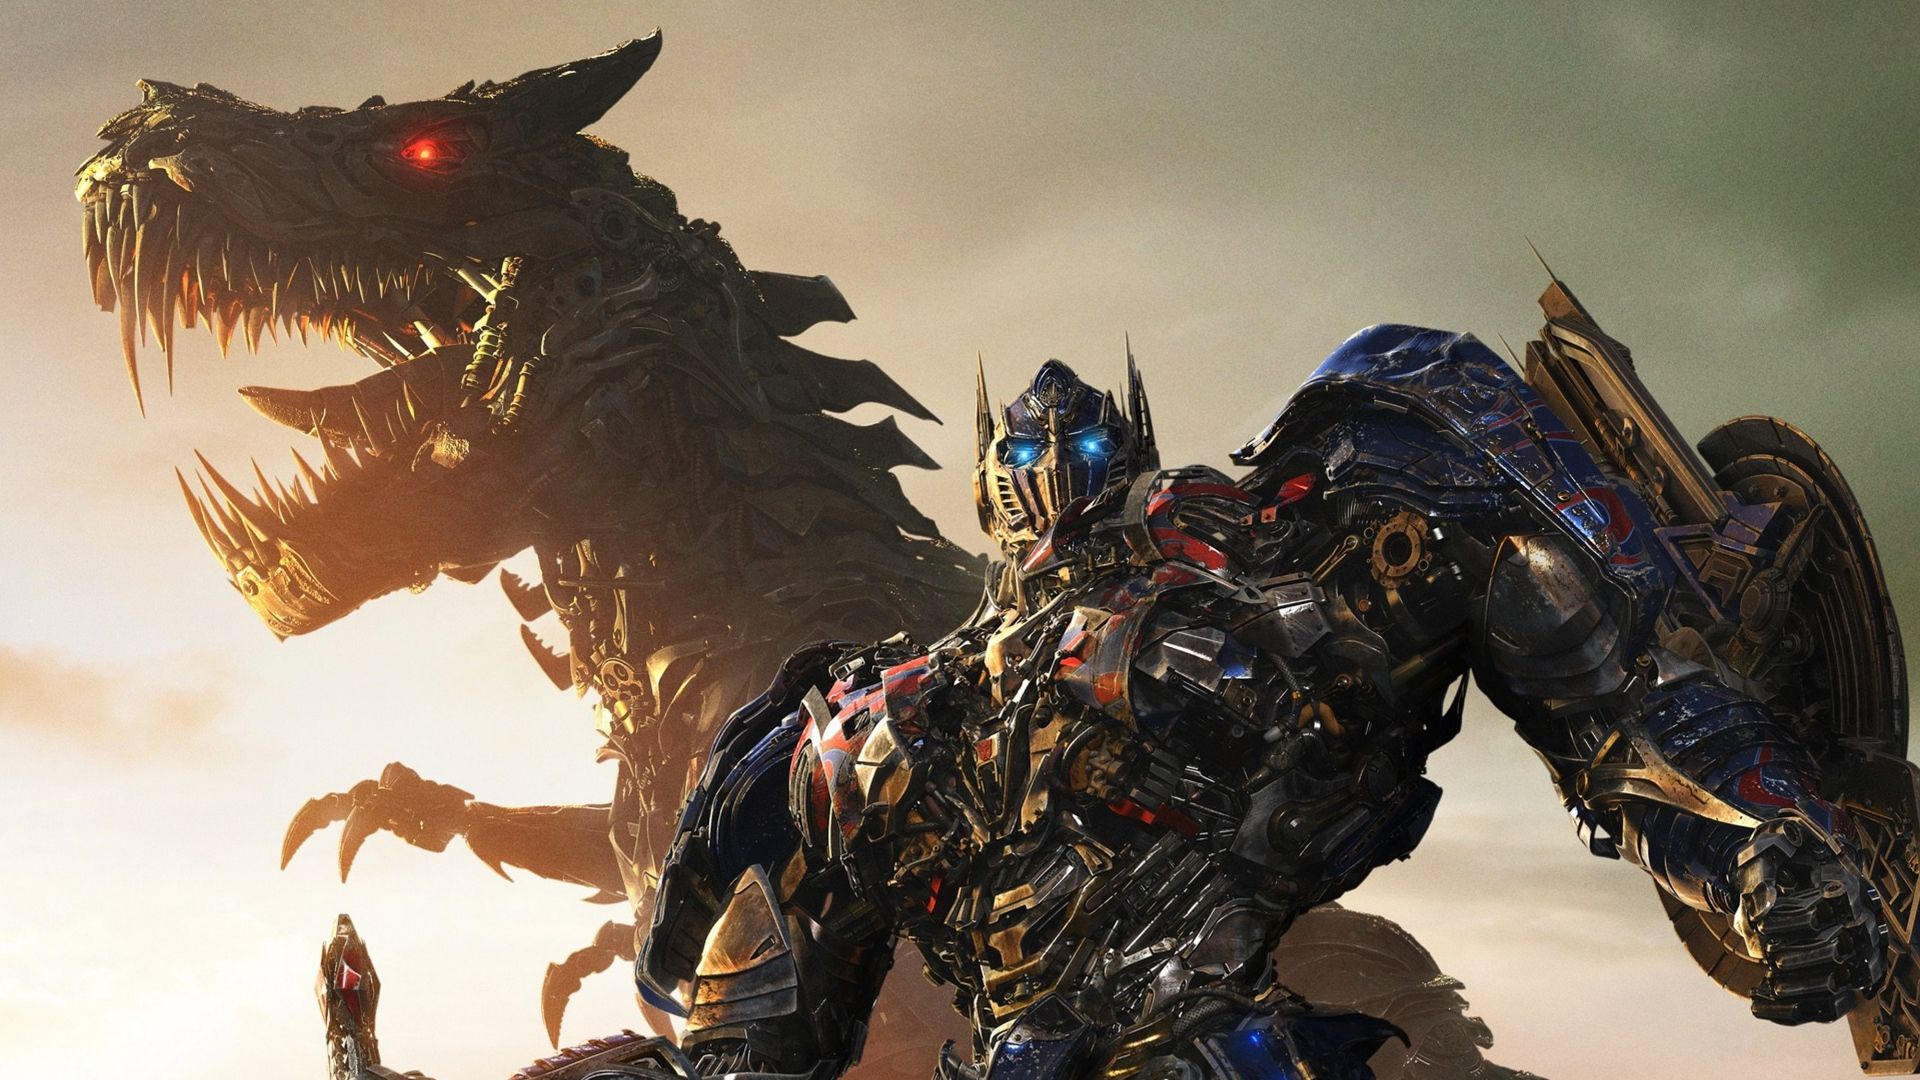 Download Wallpaper 1920x1080 Transformers age of extinction